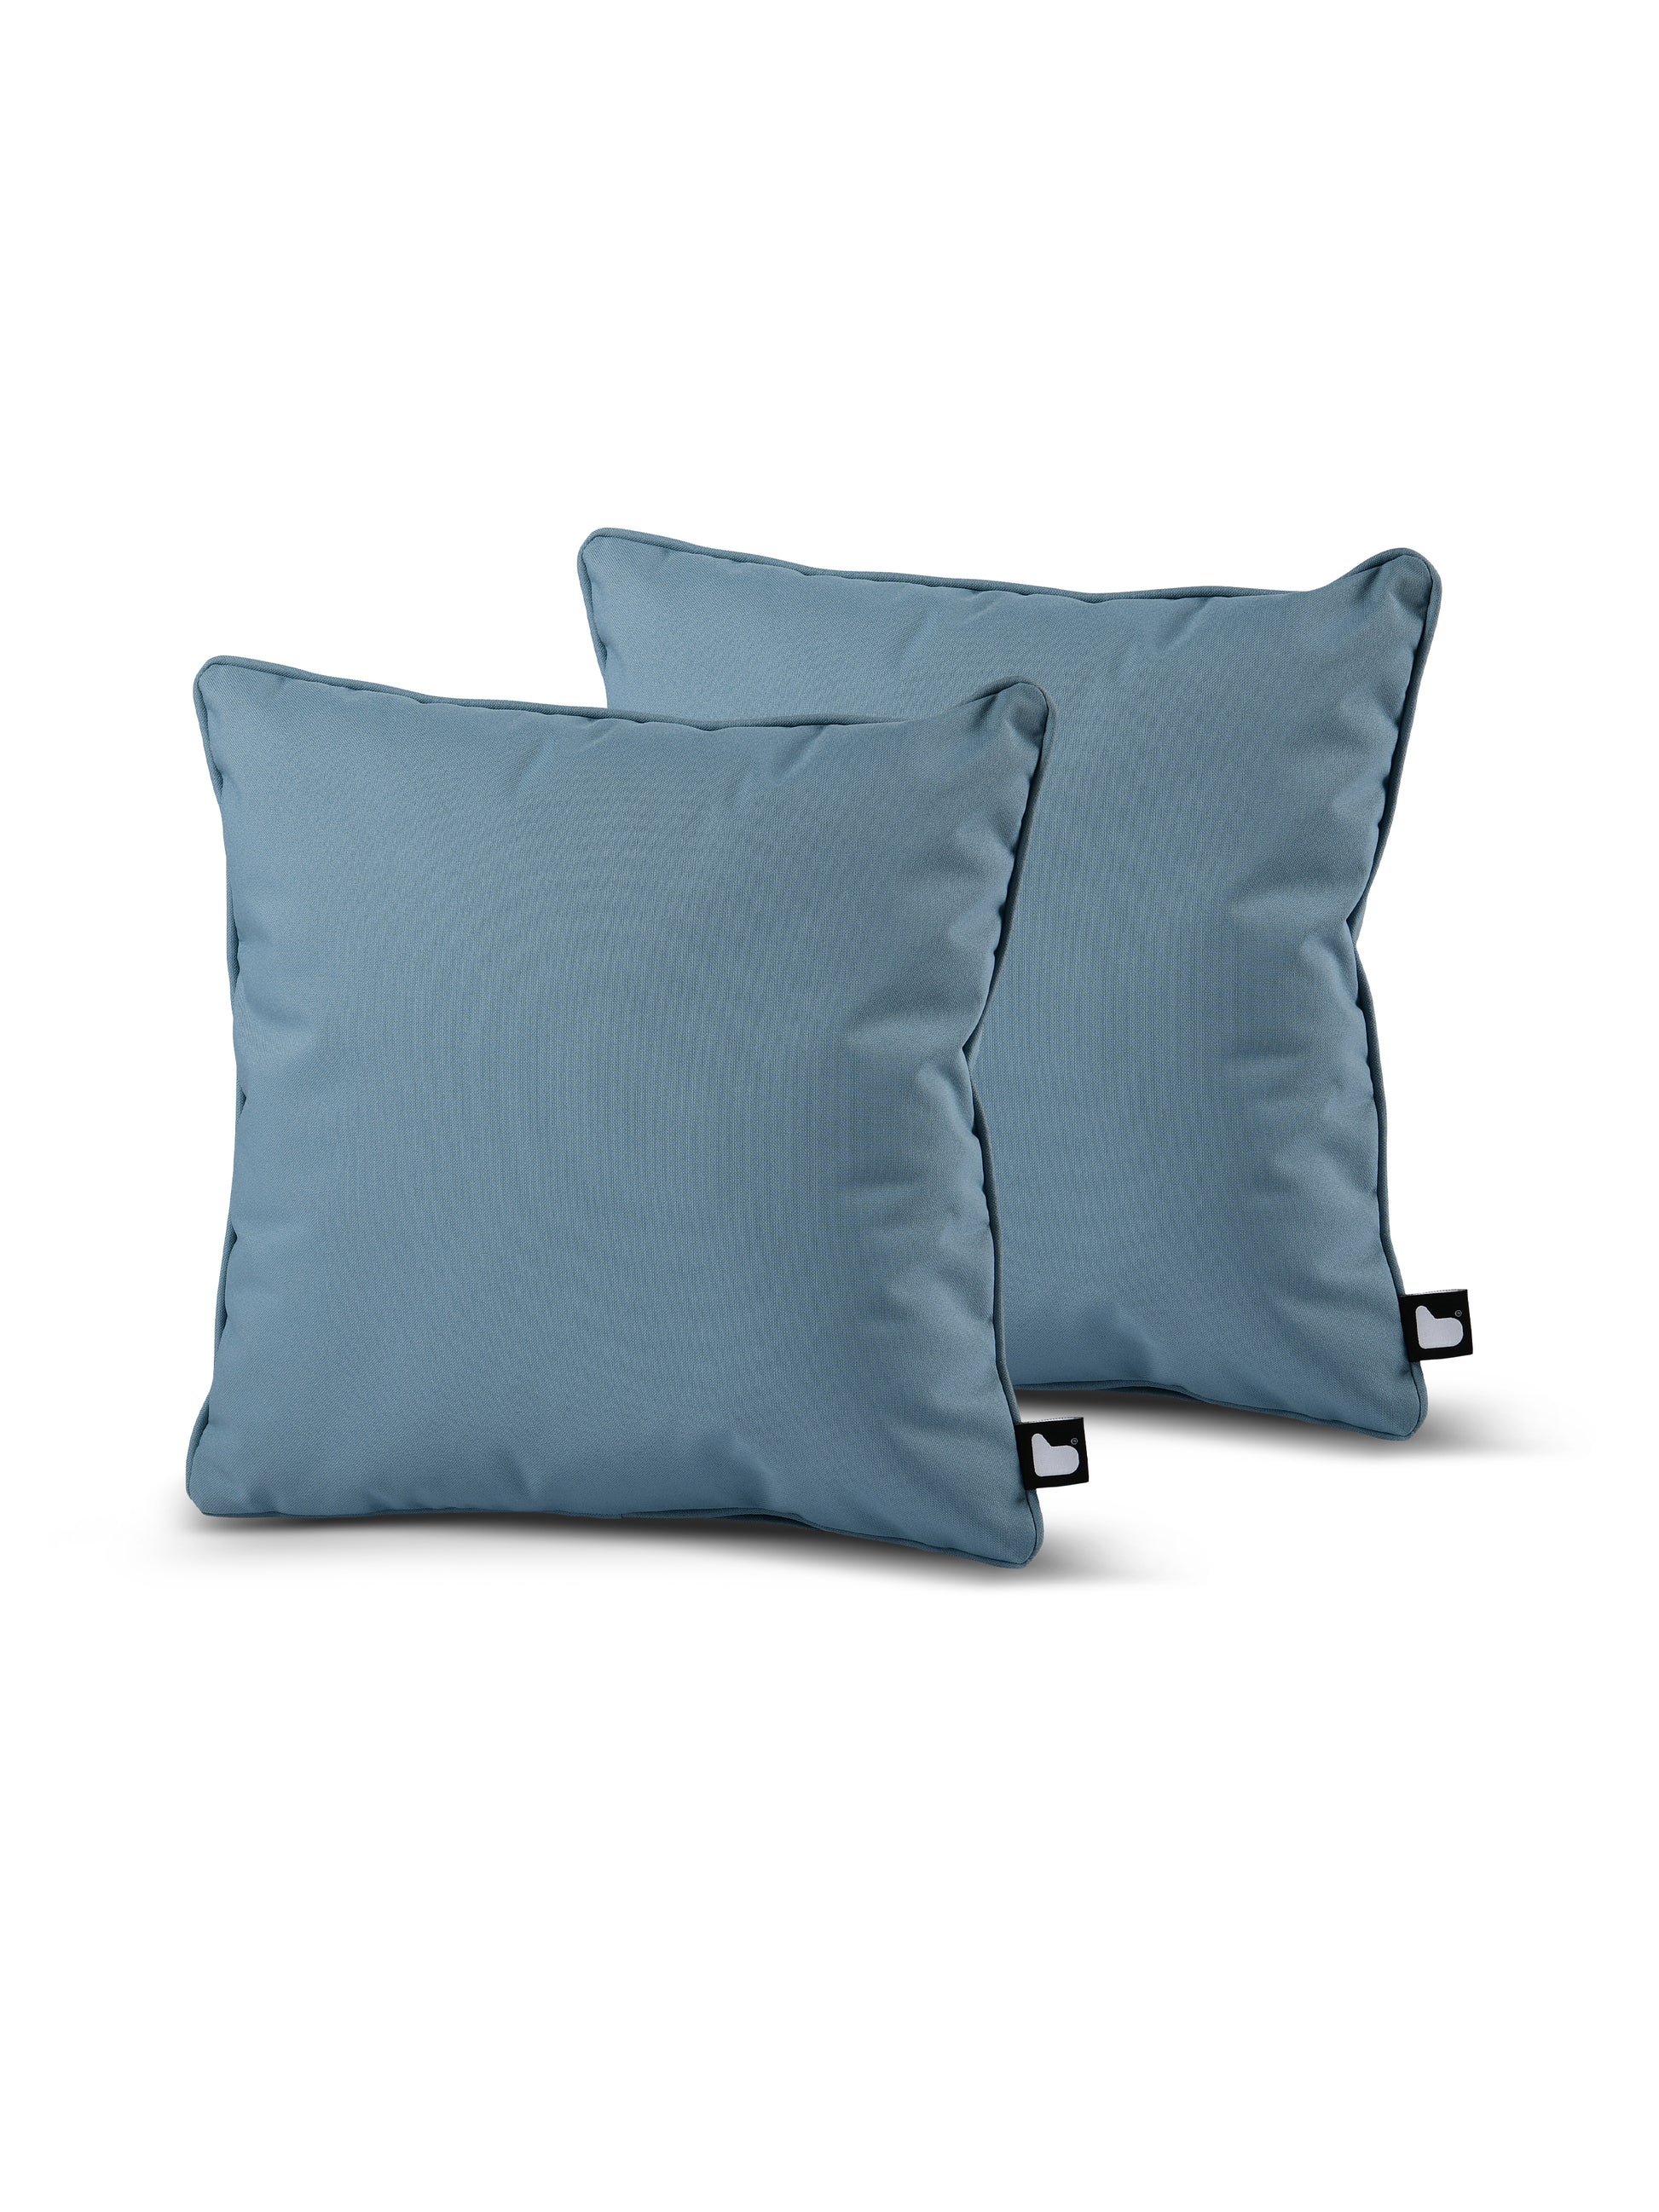 Two square blue throw pillows, made of breathable polyester, are displayed against a white background. Both pillows have a subtle texture and a small black tag on one edge. They are slightly overlapped, with the front pillow showing more prominently. These are the B Cushion Twin Pack Brights Collection by Brisks.